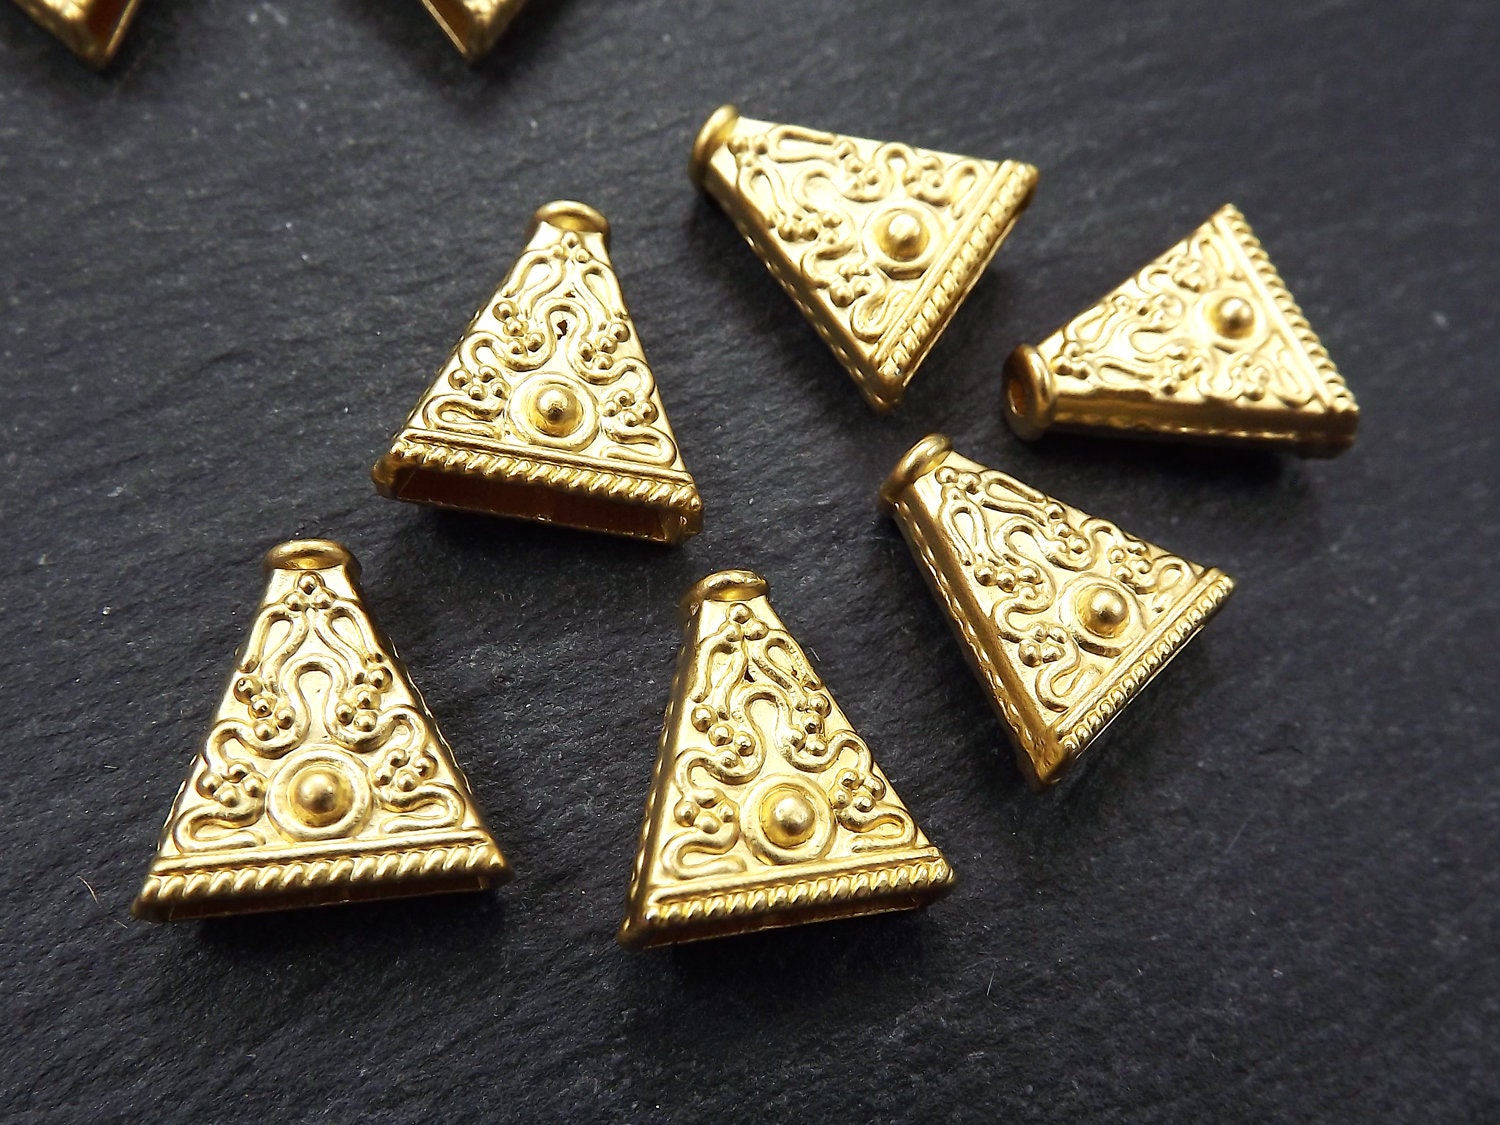 6 Ornate Detailed Flat Cone Bead End Caps -  22k Matte Gold Plated Bead caps